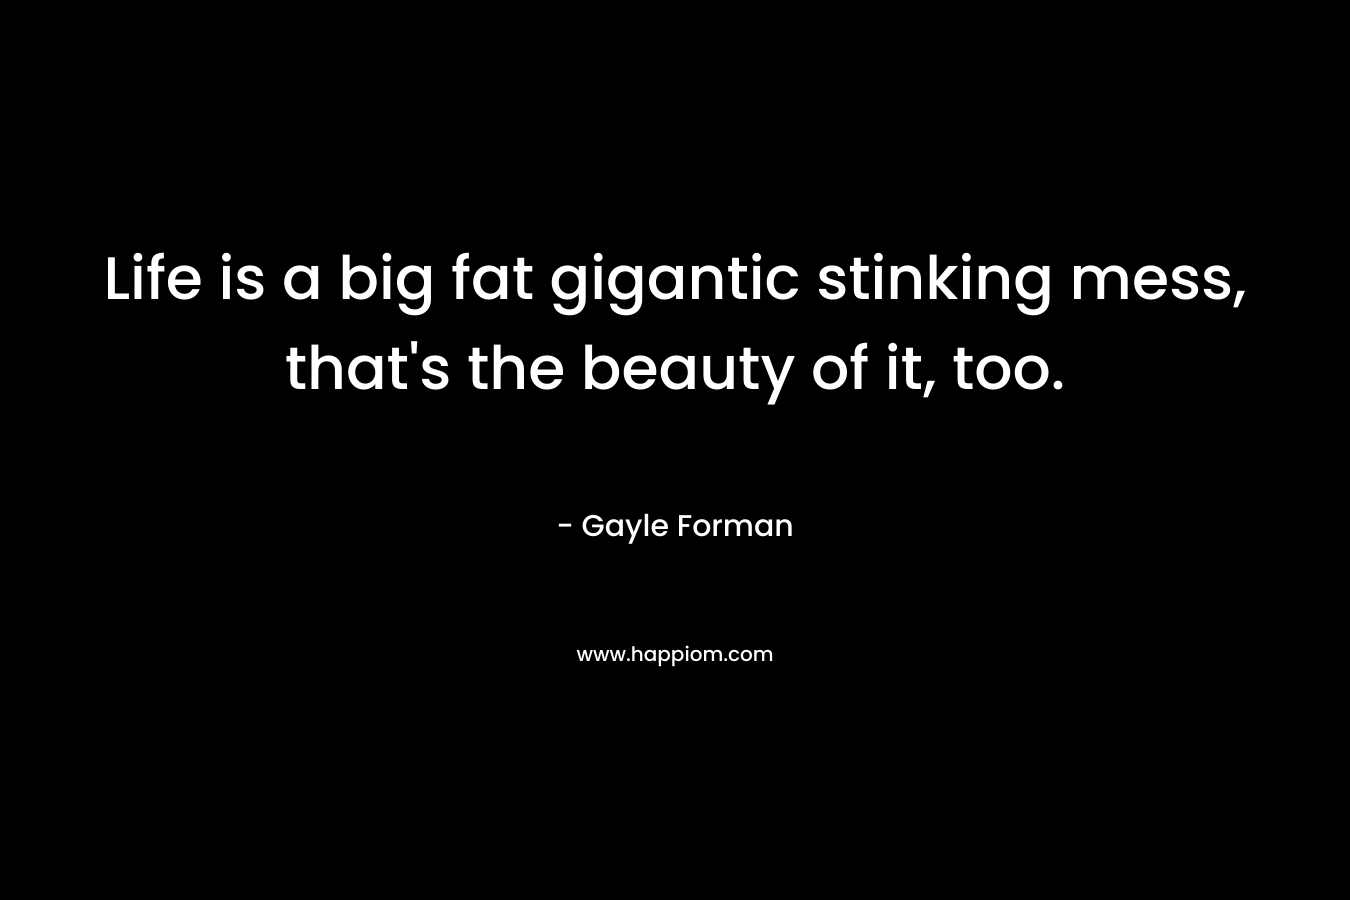 Life is a big fat gigantic stinking mess, that’s the beauty of it, too. – Gayle Forman